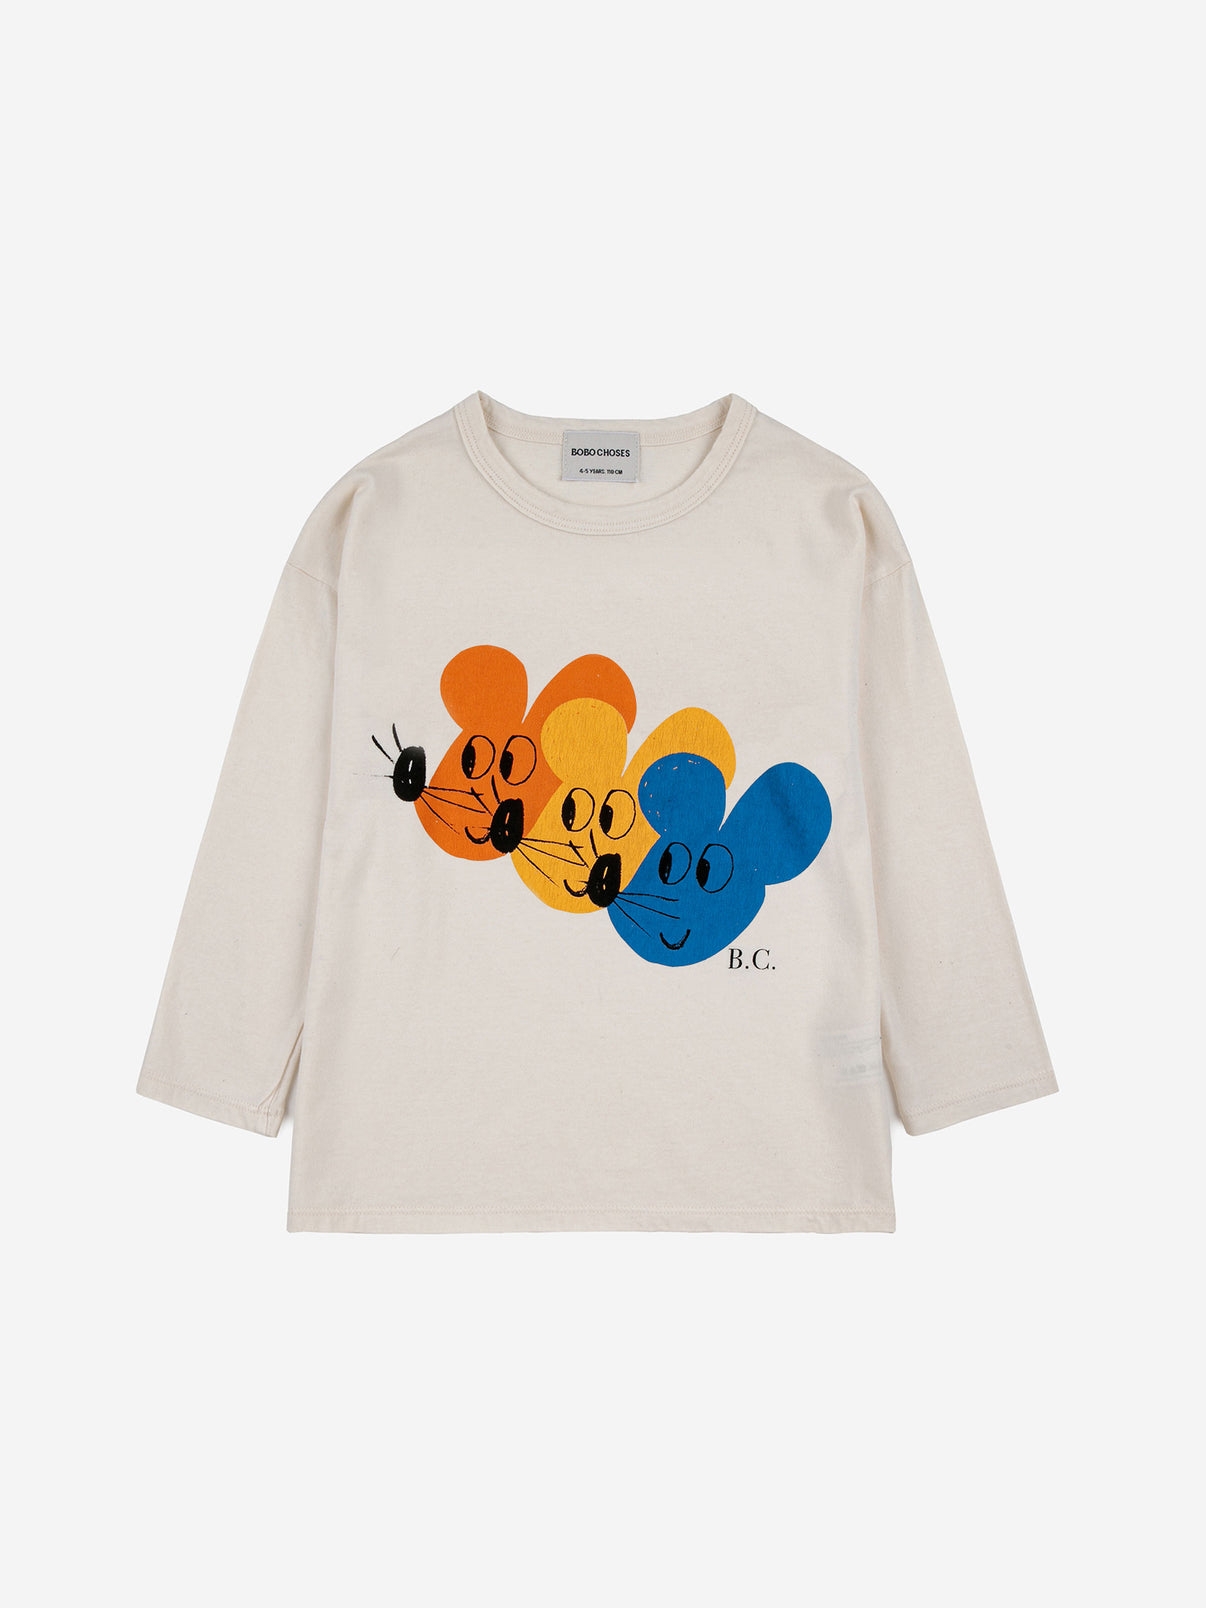 Bobo Choses Multicolor Mouse Tee. 100% organic cotton white long sleeve t-shirt. Designed with long sleeves and round neck. It has a loose fit. Made in Spain.  Made ethically and sustainably by Bobo Choses.